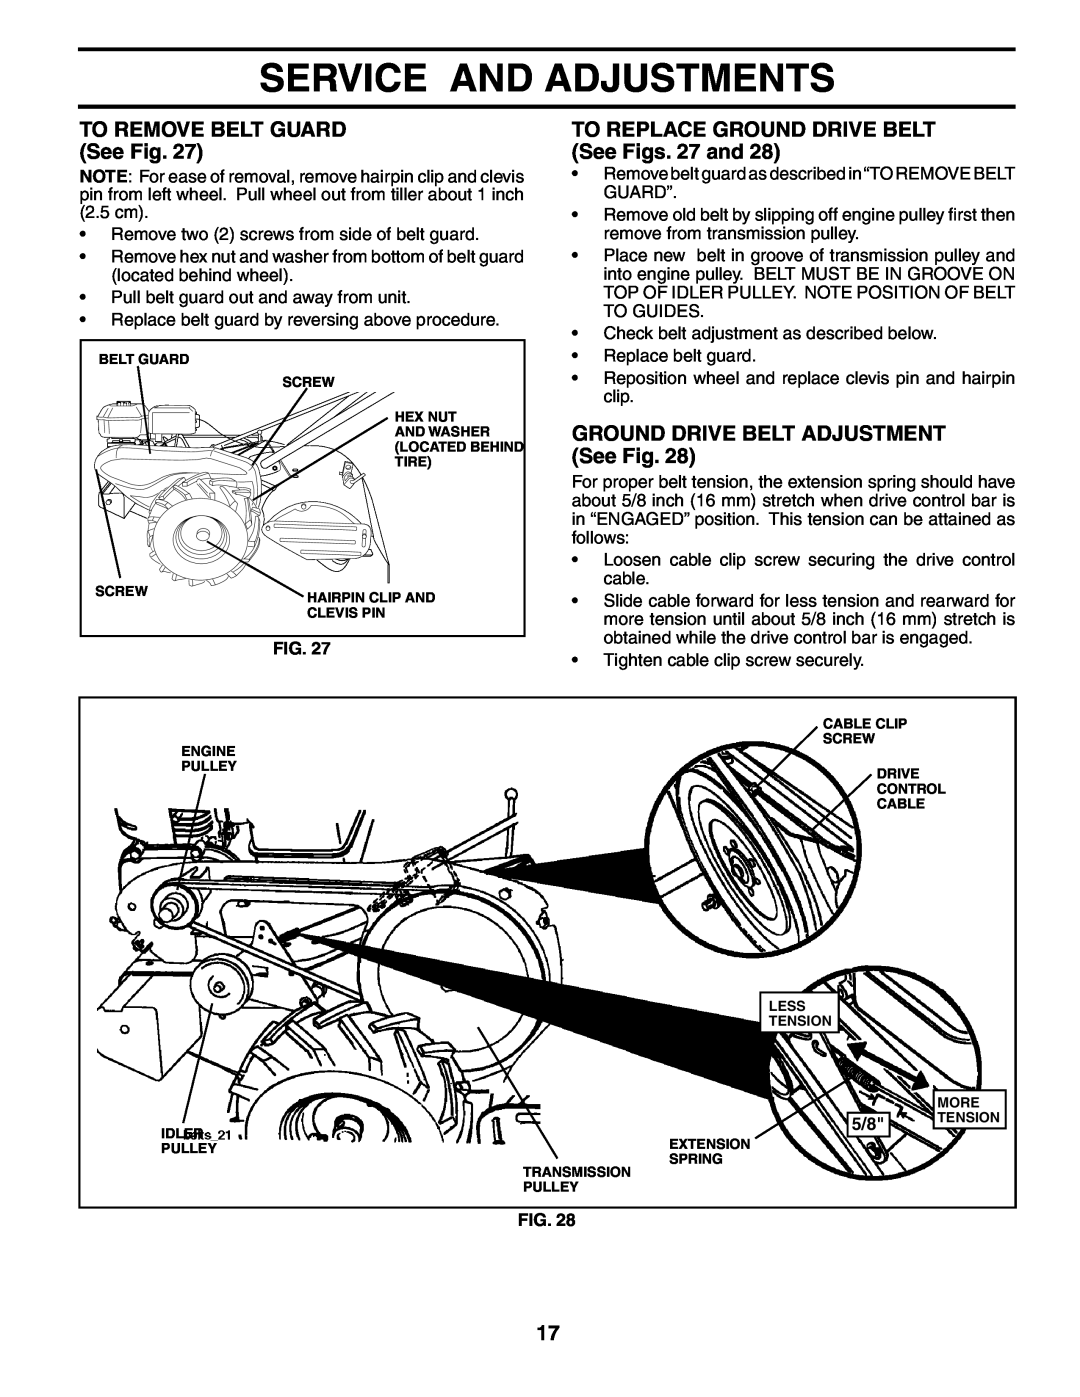 Poulan 190388 TO REMOVE BELT GUARD See Fig, TO REPLACE GROUND DRIVE BELT See Figs. 27 and, Service And Adjustments 